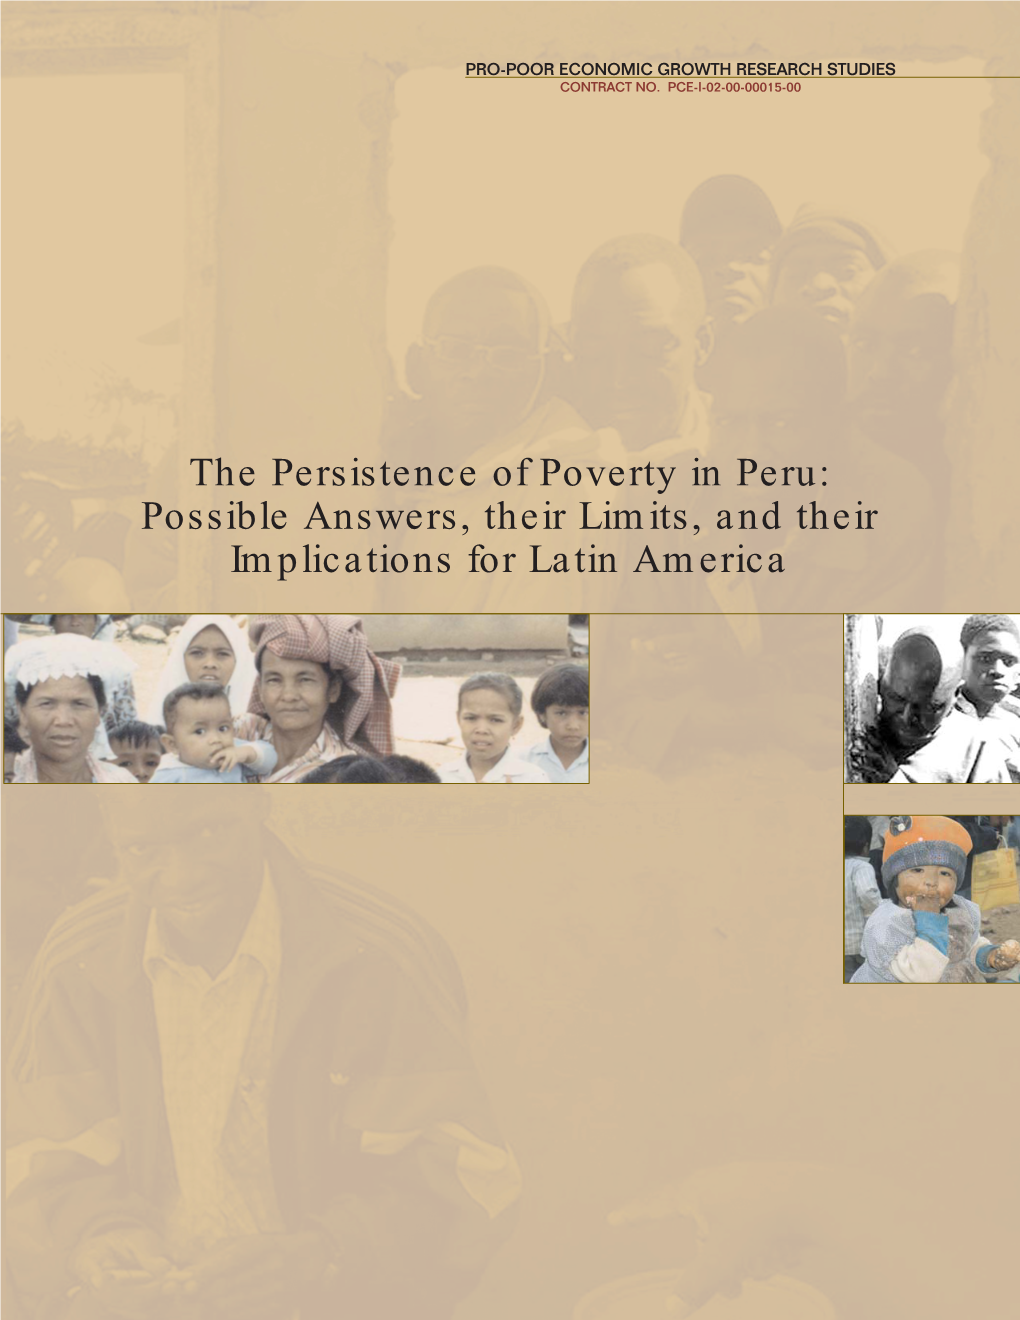 The Persistence of Poverty in Peru: Possible Answers, Their Limits, and Their Implications for Latin America